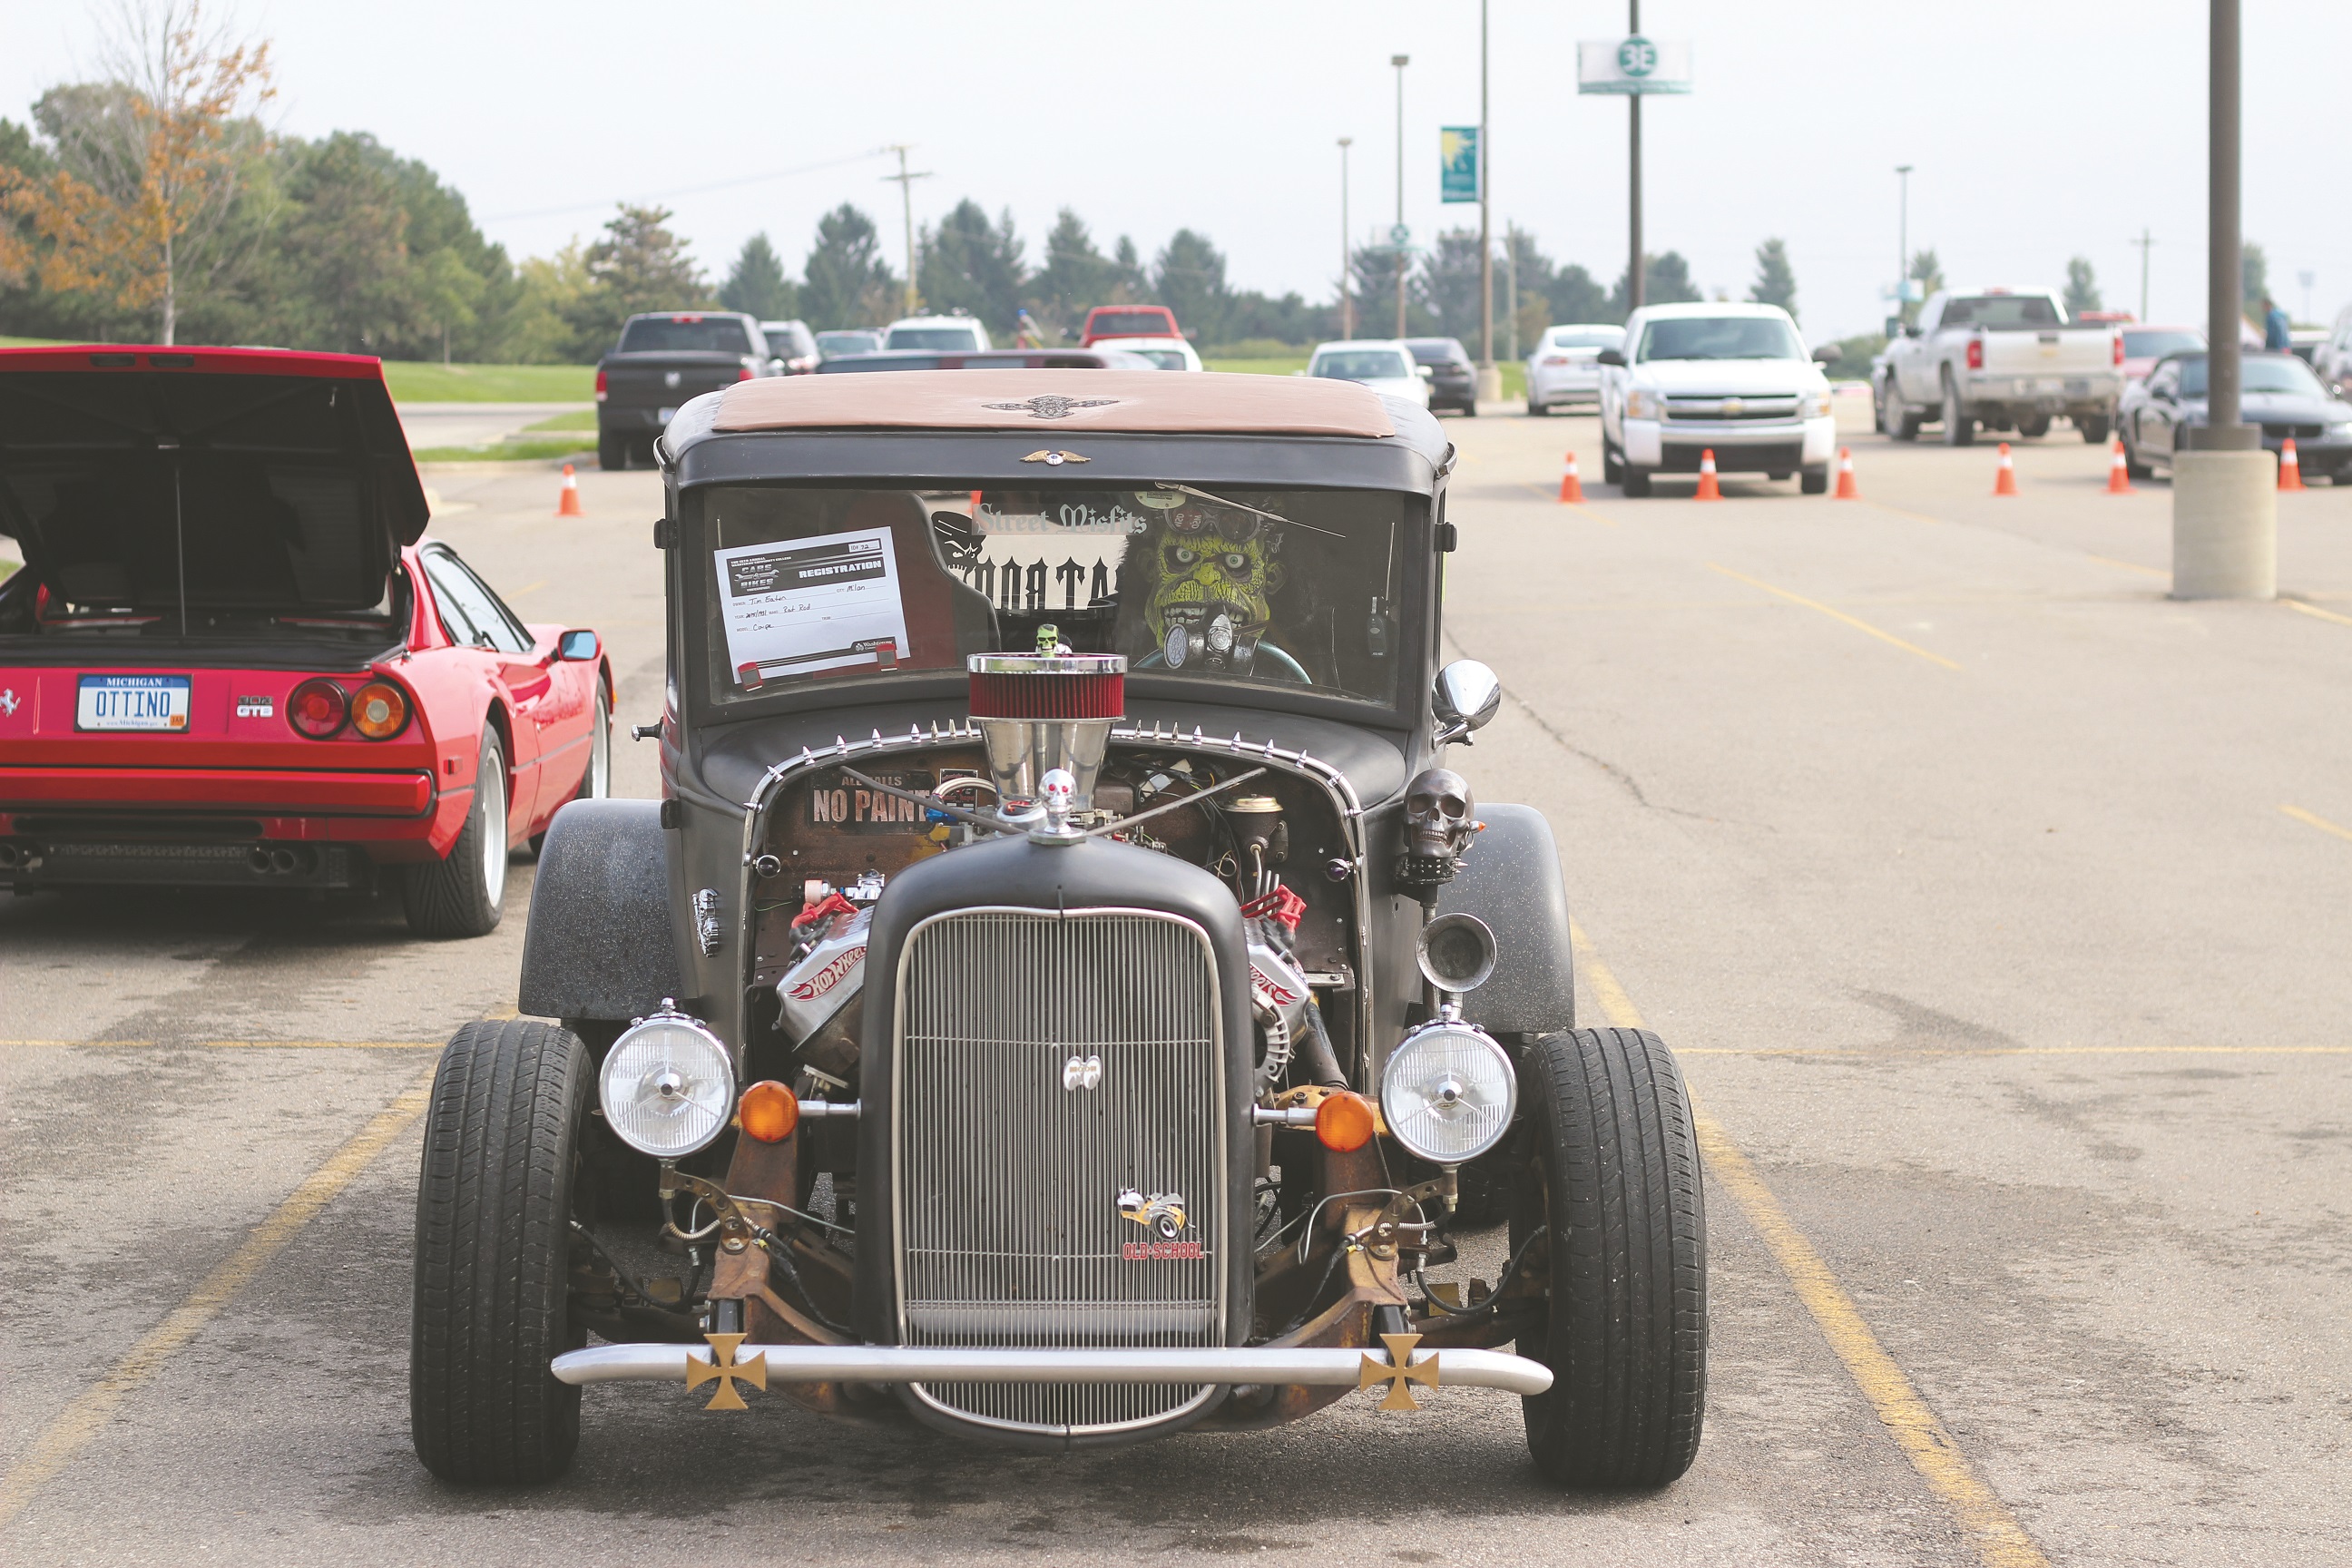 Participants show off their cars. Catherine Engstrom-Hadley | Washtenaw Voice